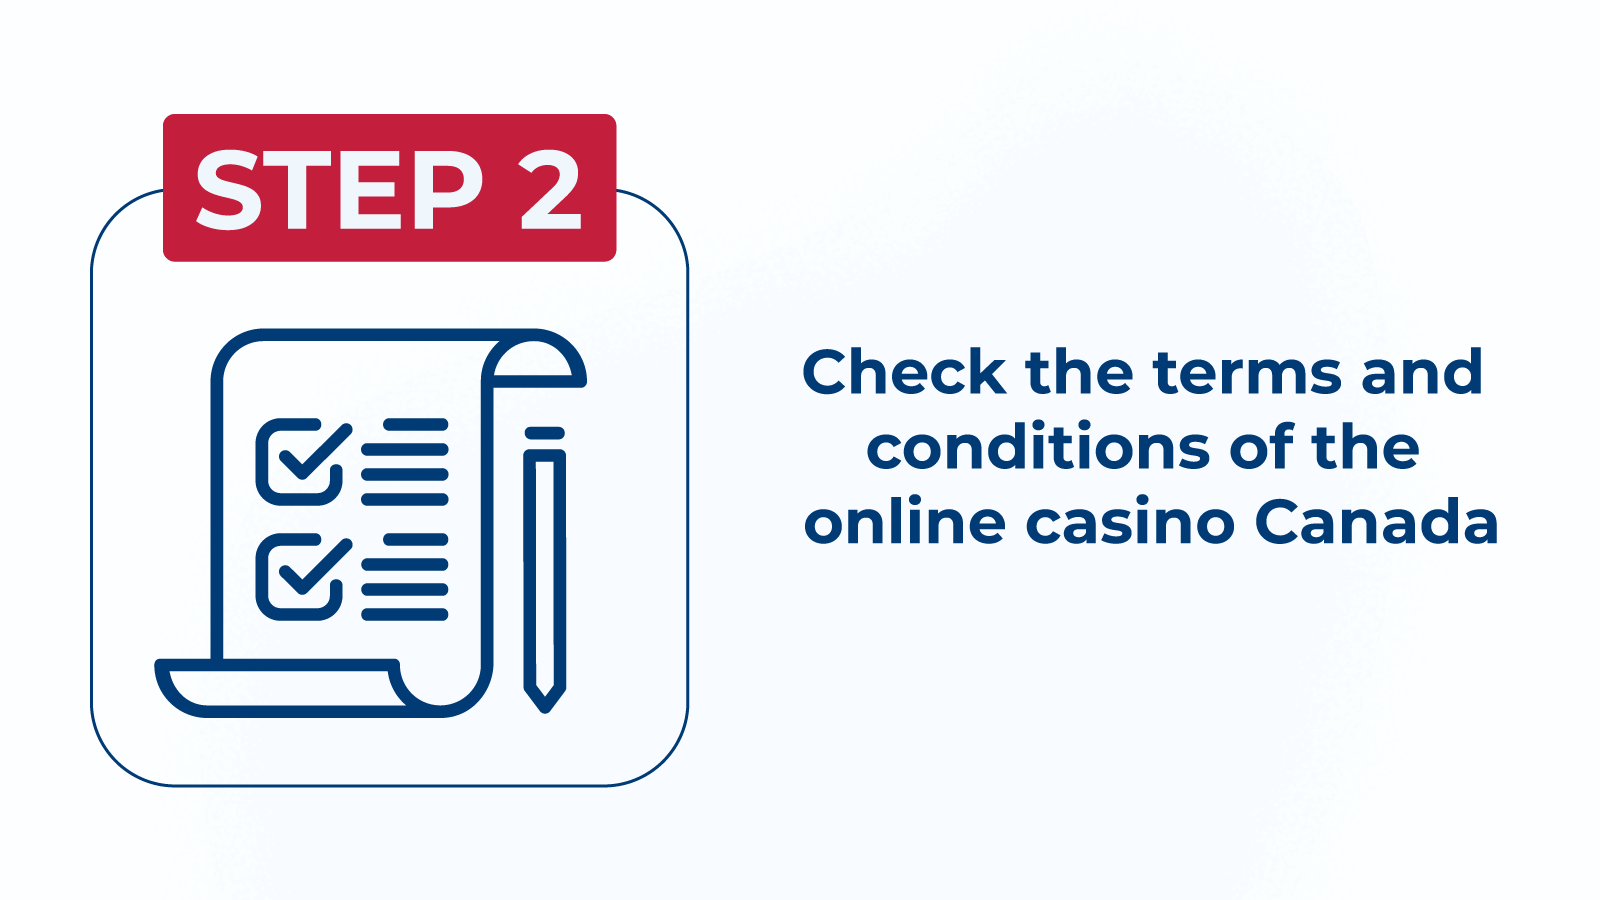 Step 2 Check the terms and conditions of the online casino Canada